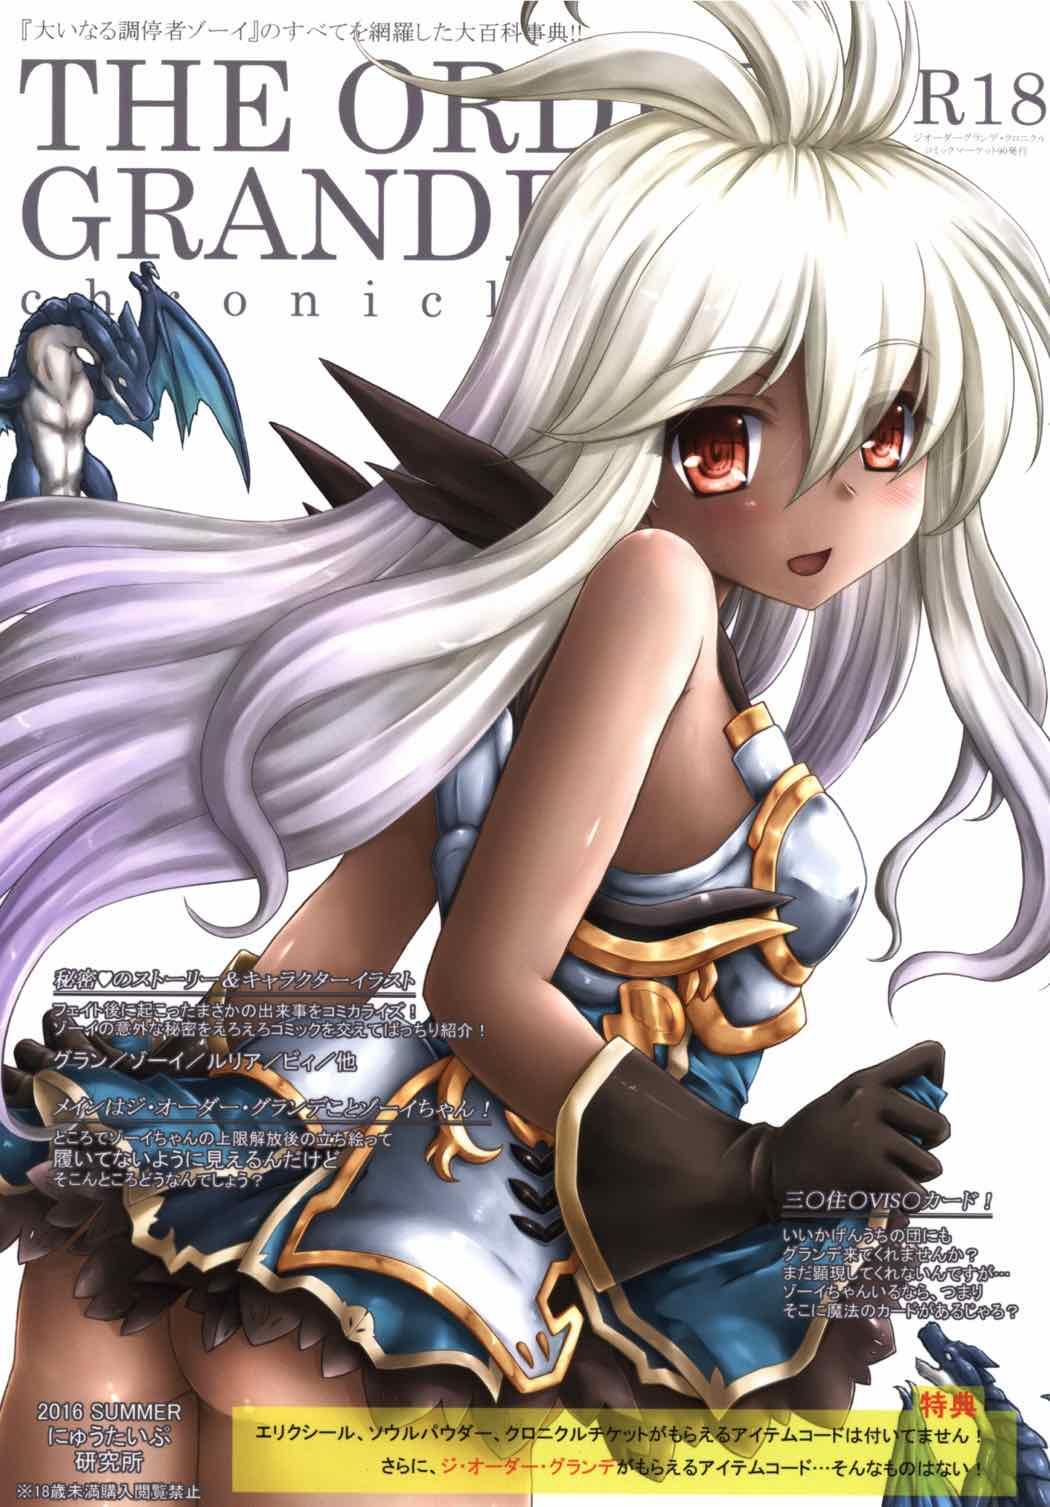 Chastity THE ORDER GRANDE chronicle - Granblue fantasy Blowjob Contest - Page 1